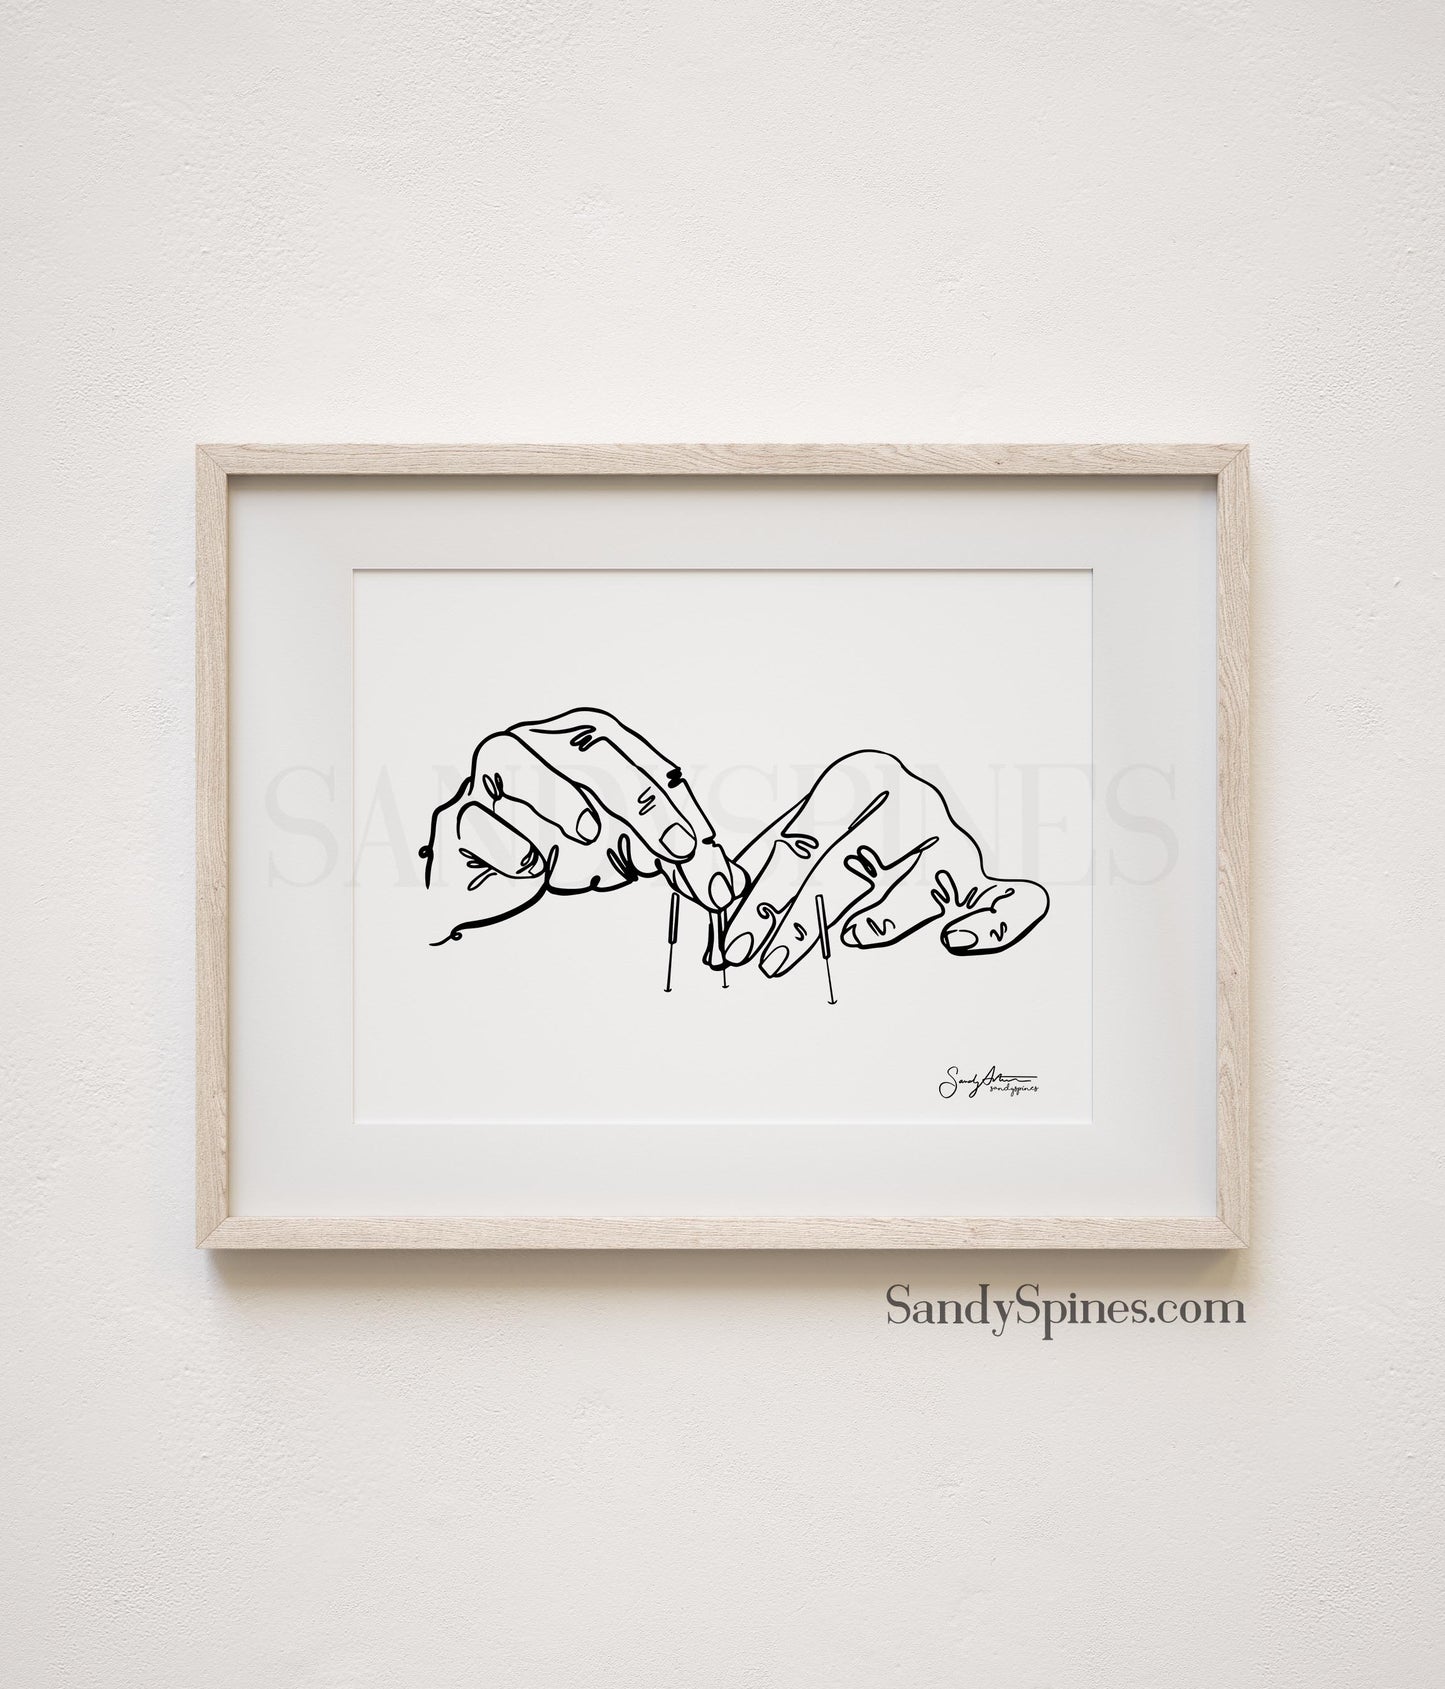 Original Artwork - Black and White Illustration of two hands placing acupuncture needles